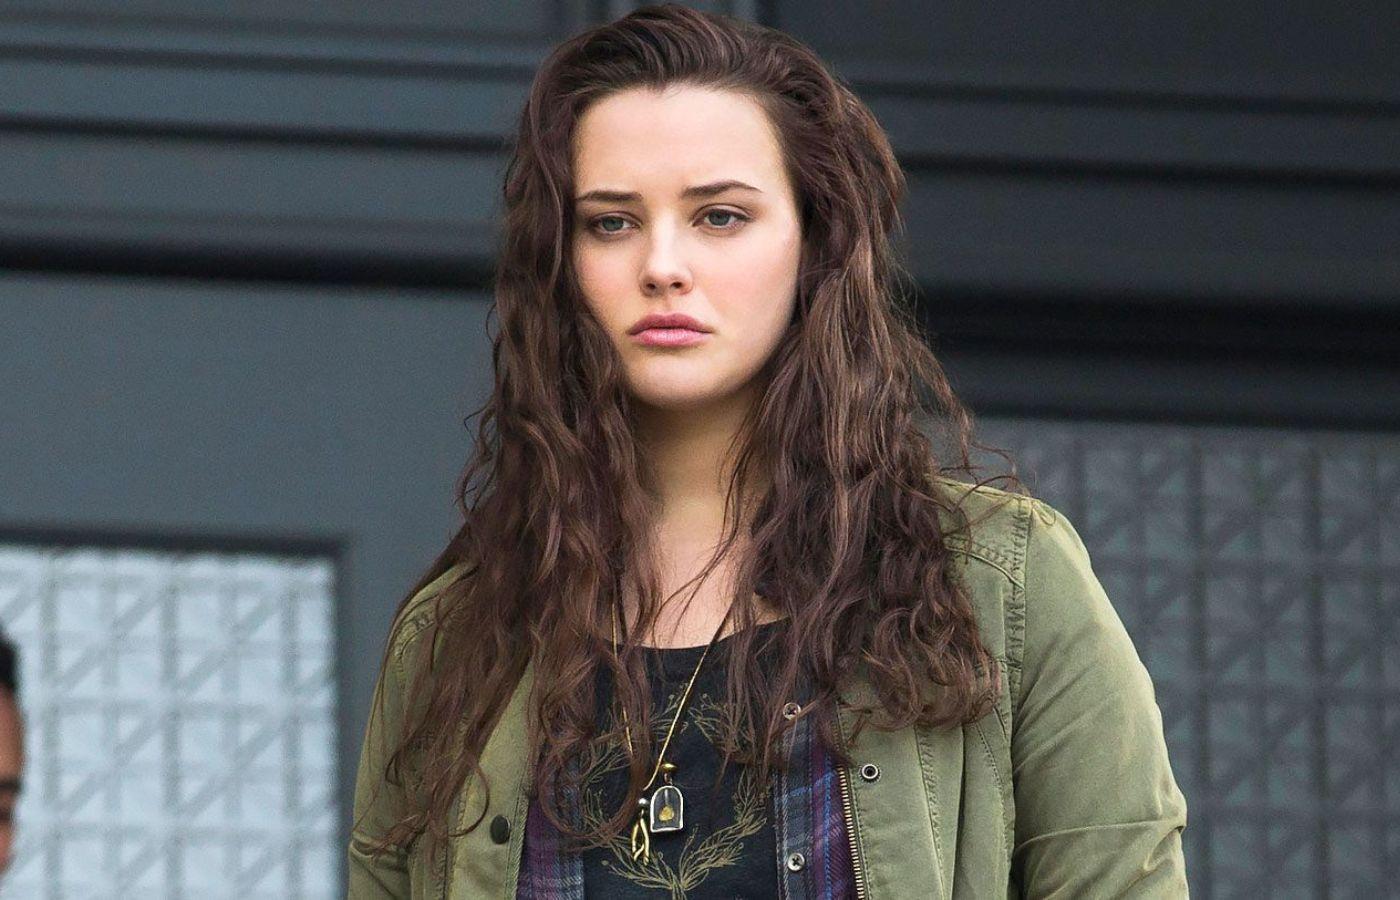 Katherine Langford was set to appear in new Starz show